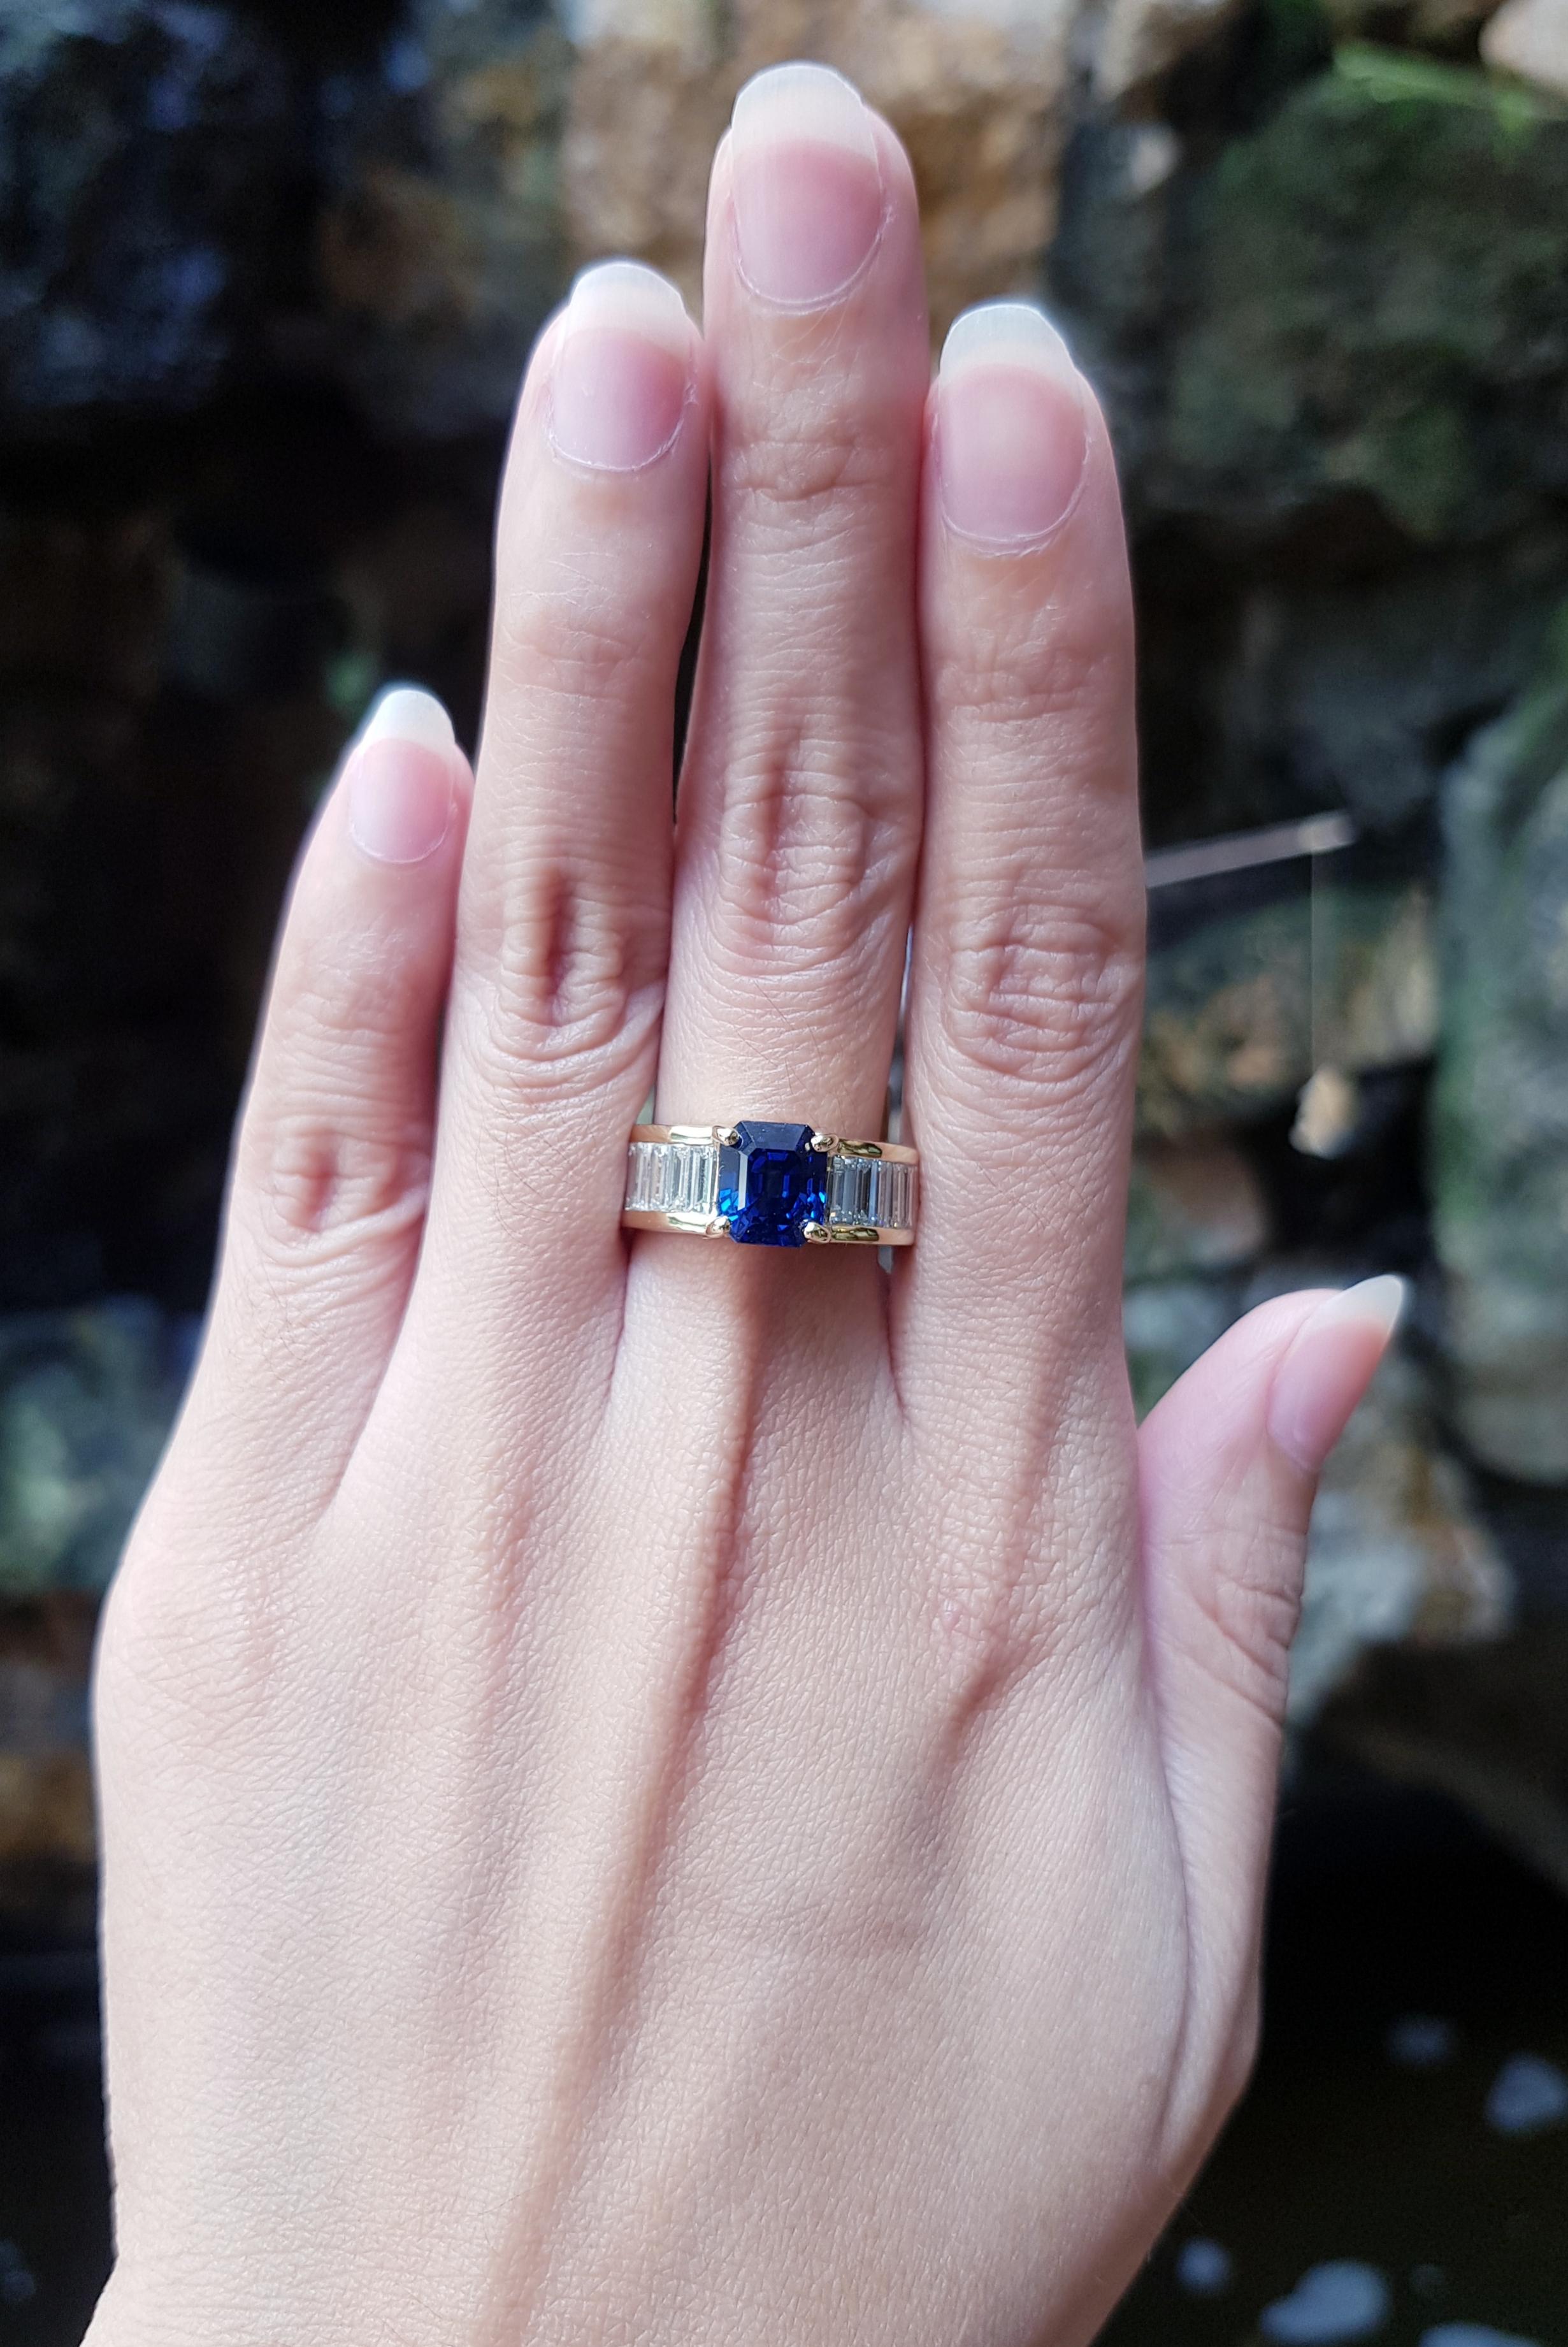 Blue Sapphire 3.34 carats with Diamond 1.88 carats Ring set in 18 Karat Gold Settings
(GIA Certitied)

Width:  0.8 cm 
Length: 0.8 cm
Ring Size: 57
Total Weight: 12.21 grams


